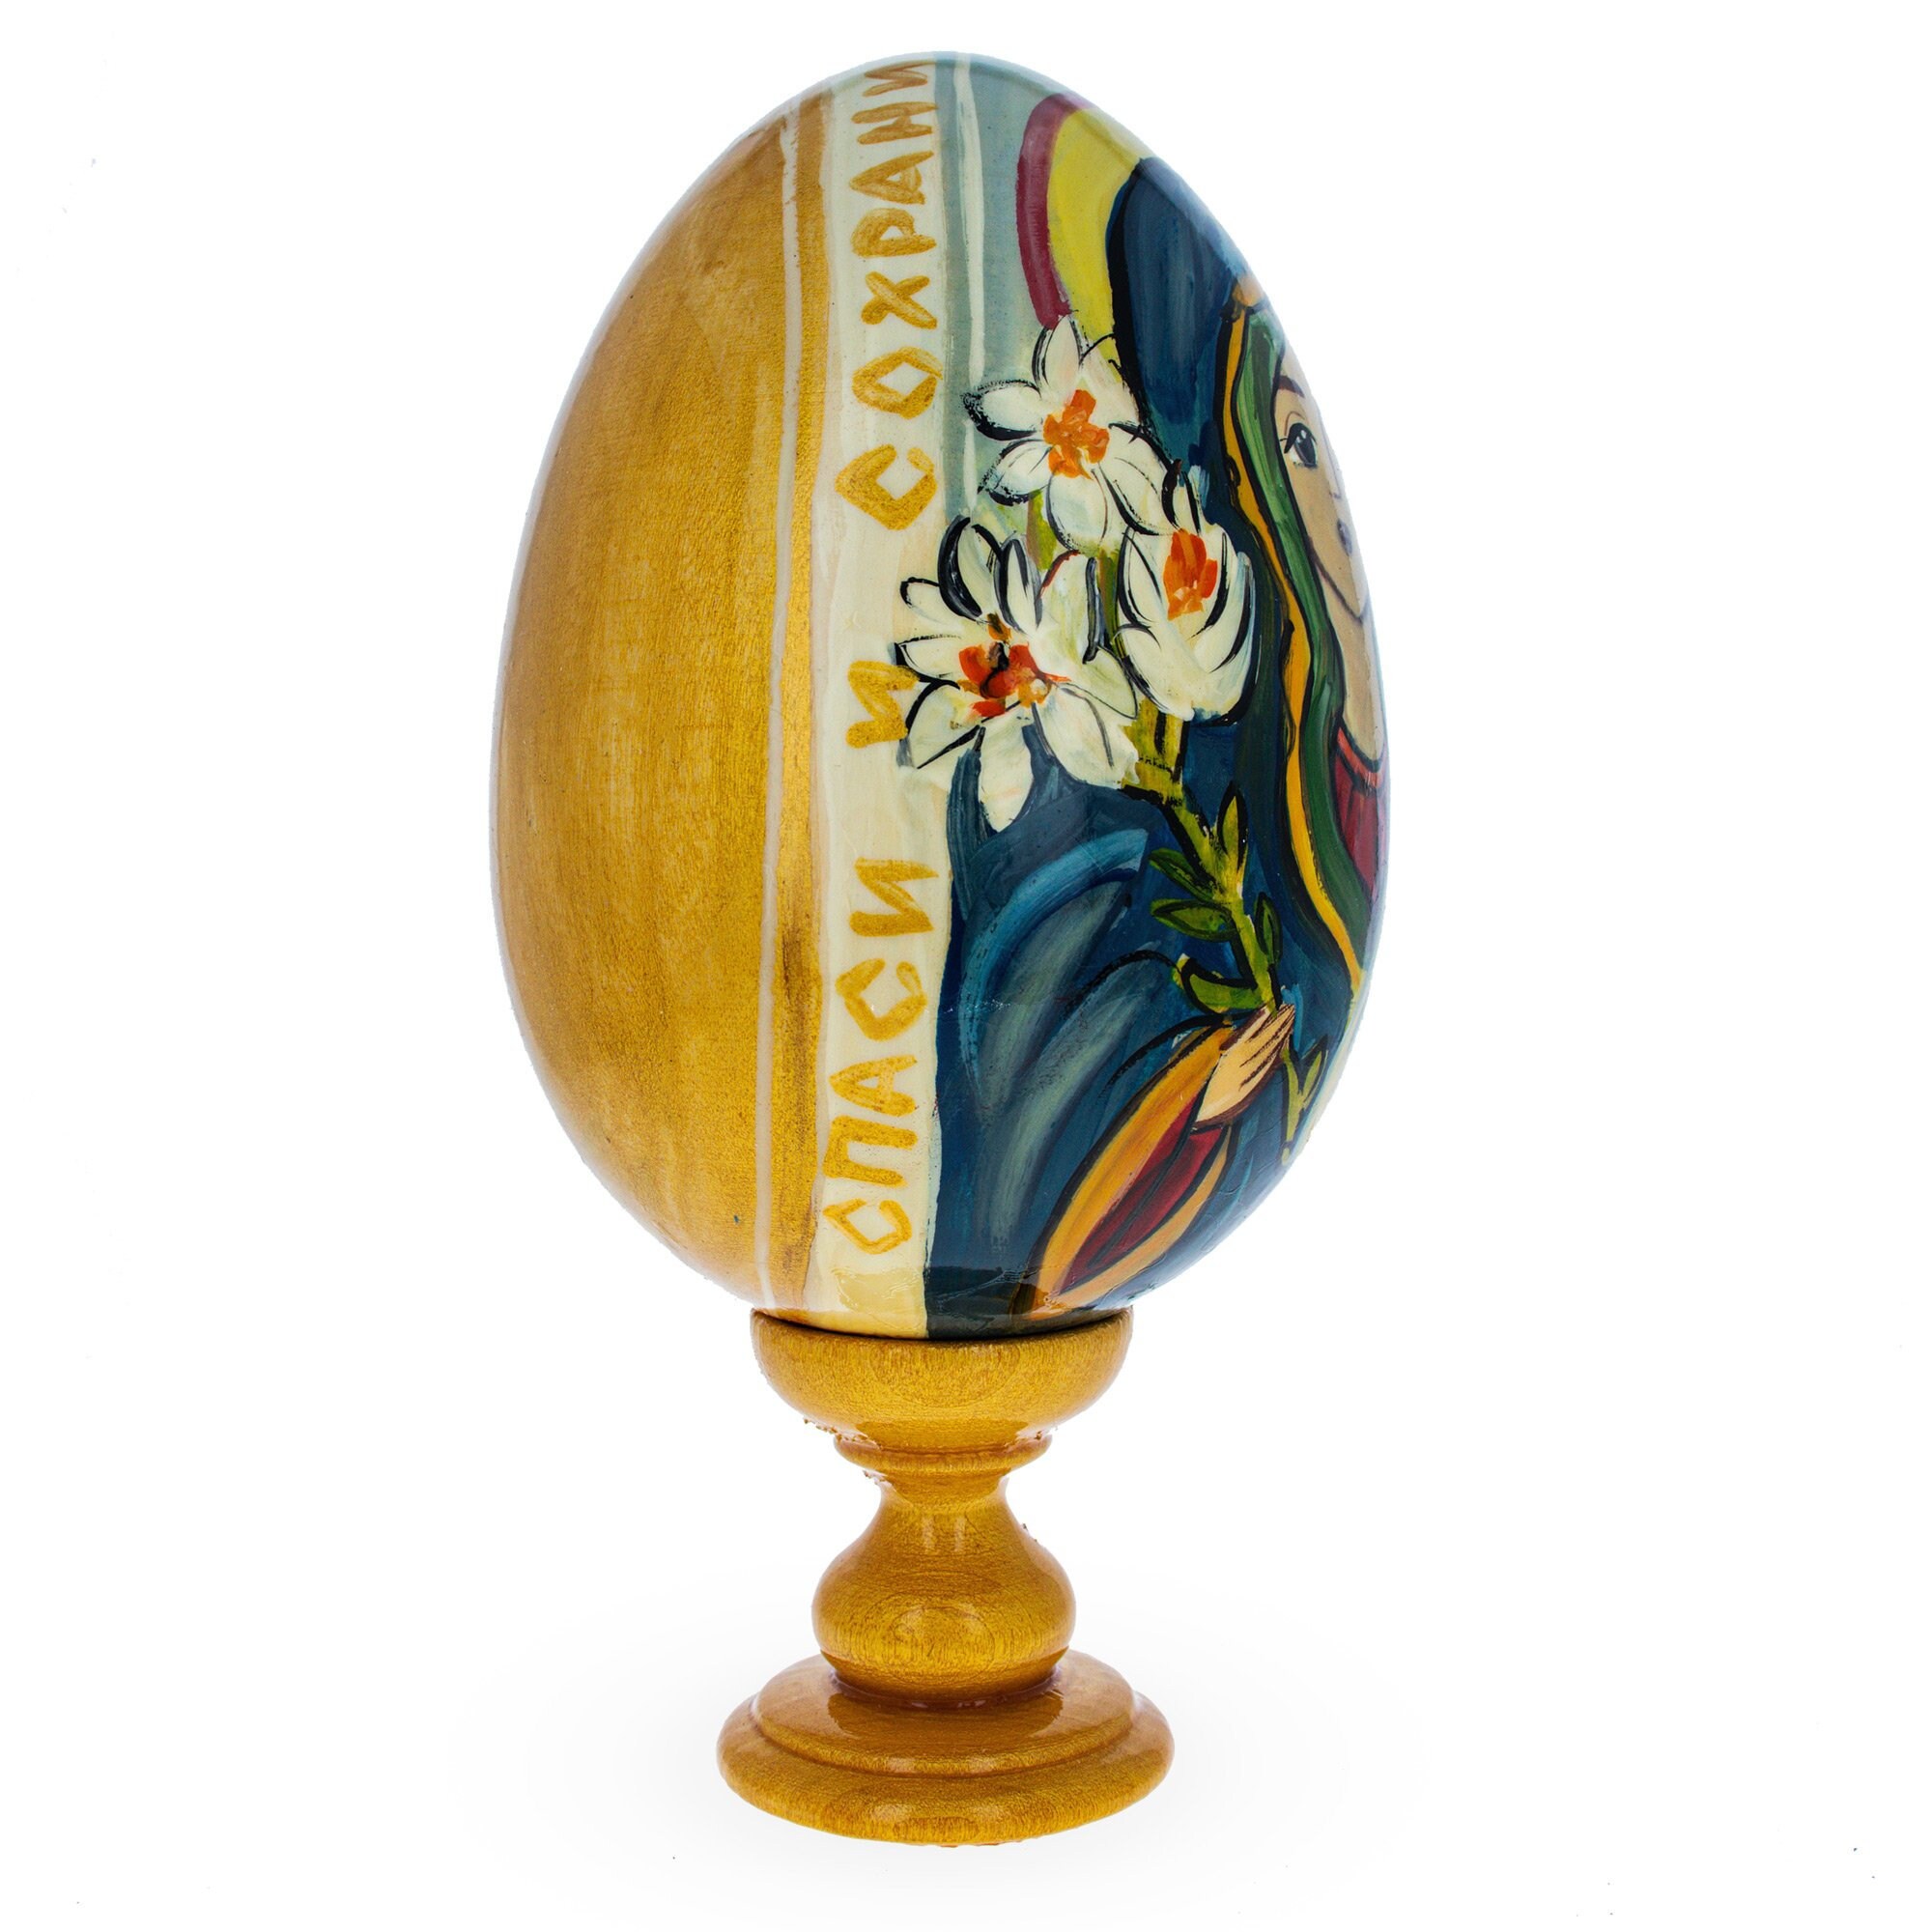 Mary and Jesus Large Wooden Hand Painted Icon Easter Egg オブジェ、置き物